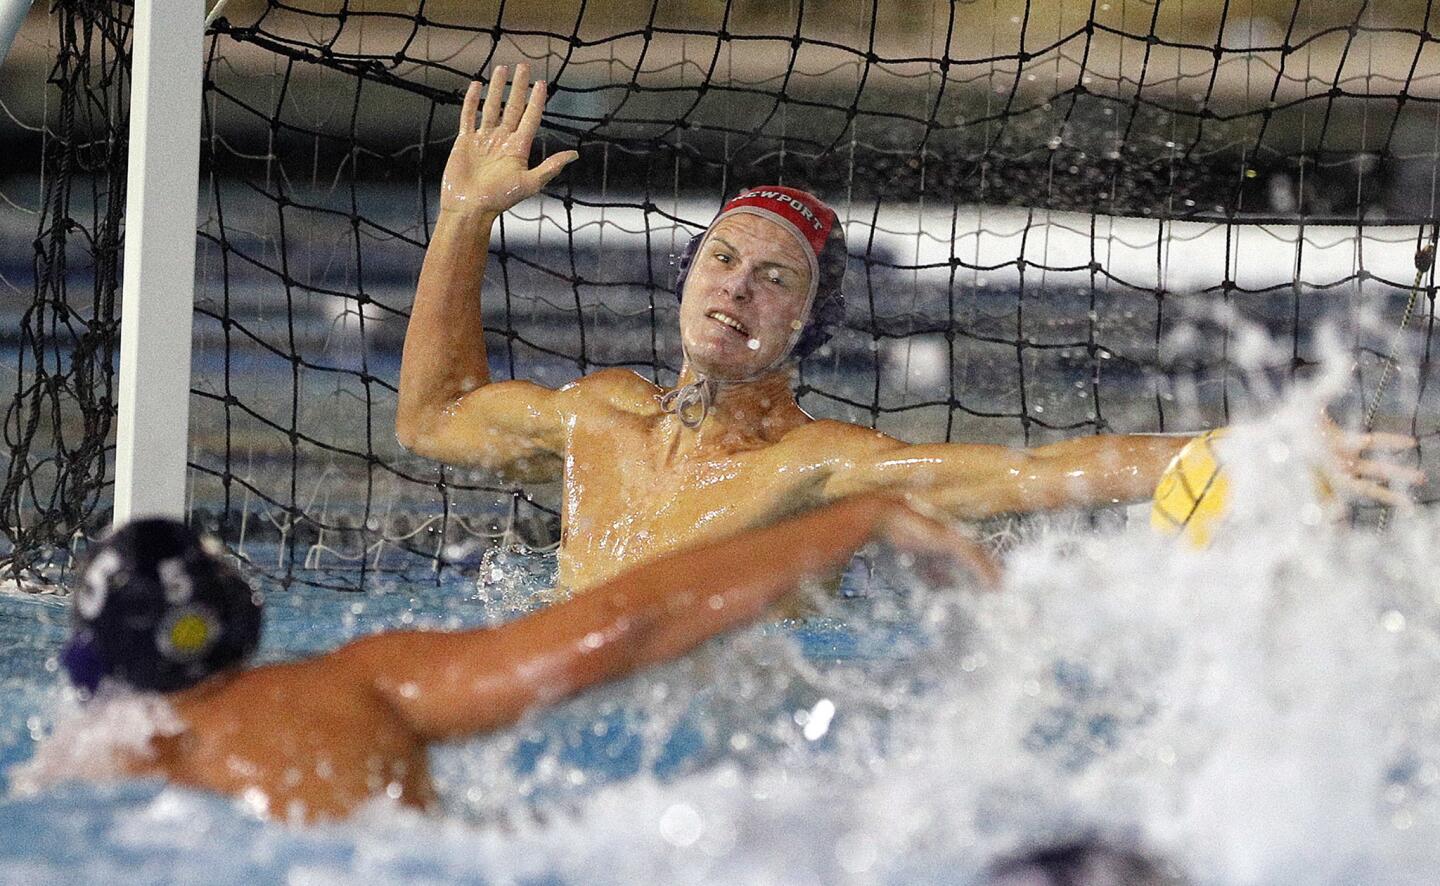 Newport Harbor High goalkeeper Blake Jackson makes a stop on a Corona del Mar shot in the fourth quarter of a Surf League boys' water polo match at Newport Harbor High on Wednesday, October 3, 2018.